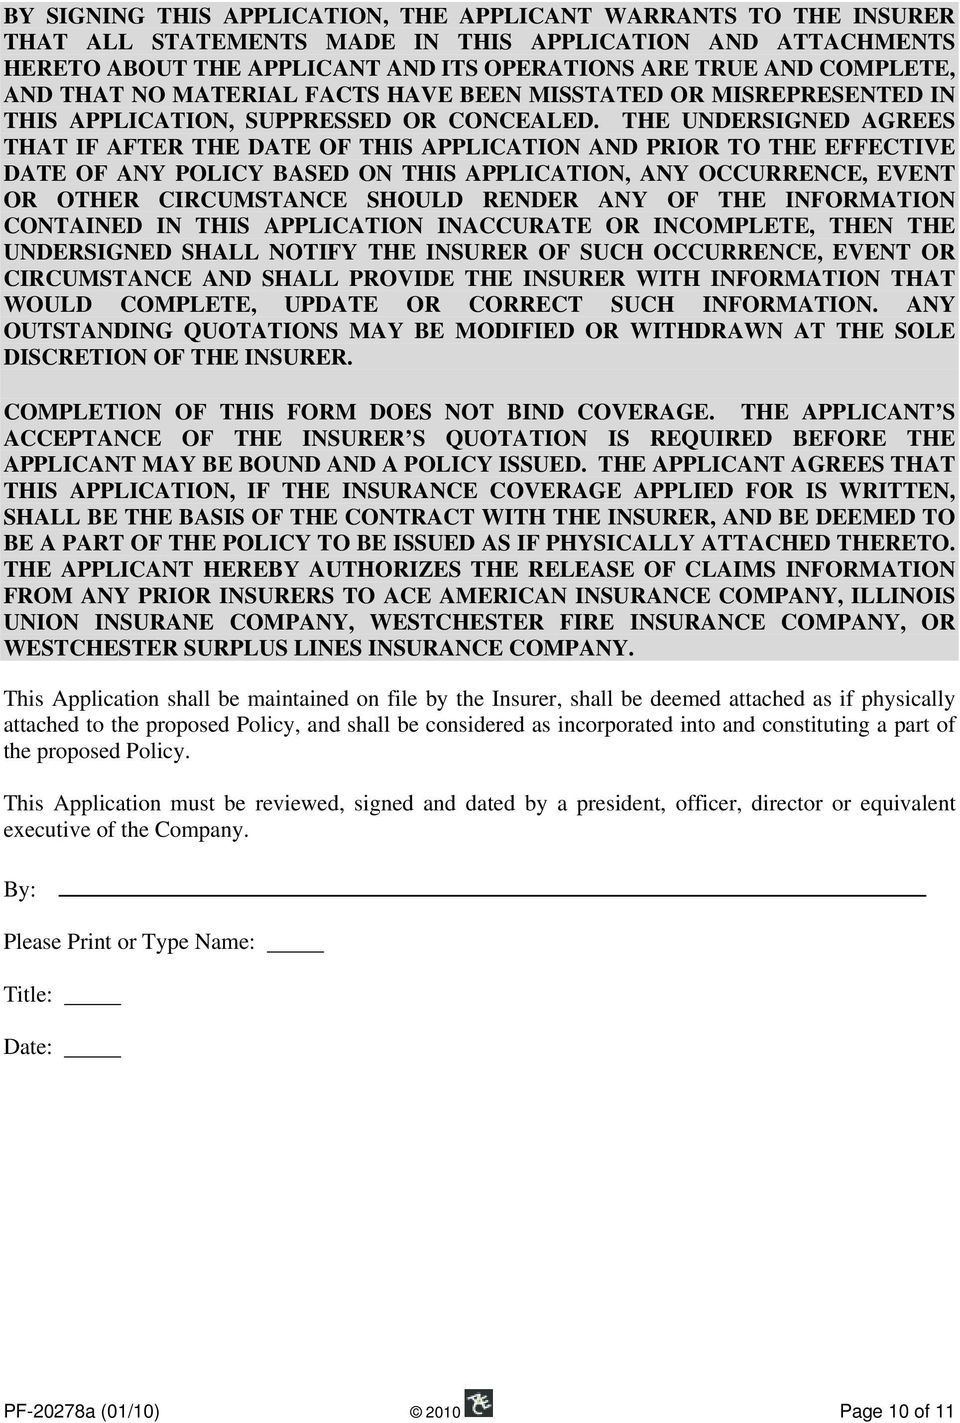 THE UNDERSIGNED AGREES THAT IF AFTER THE DATE OF THIS APPLICATION AND PRIOR TO THE EFFECTIVE DATE OF ANY POLICY BASED ON THIS APPLICATION, ANY OCCURRENCE, EVENT OR OTHER CIRCUMSTANCE SHOULD RENDER